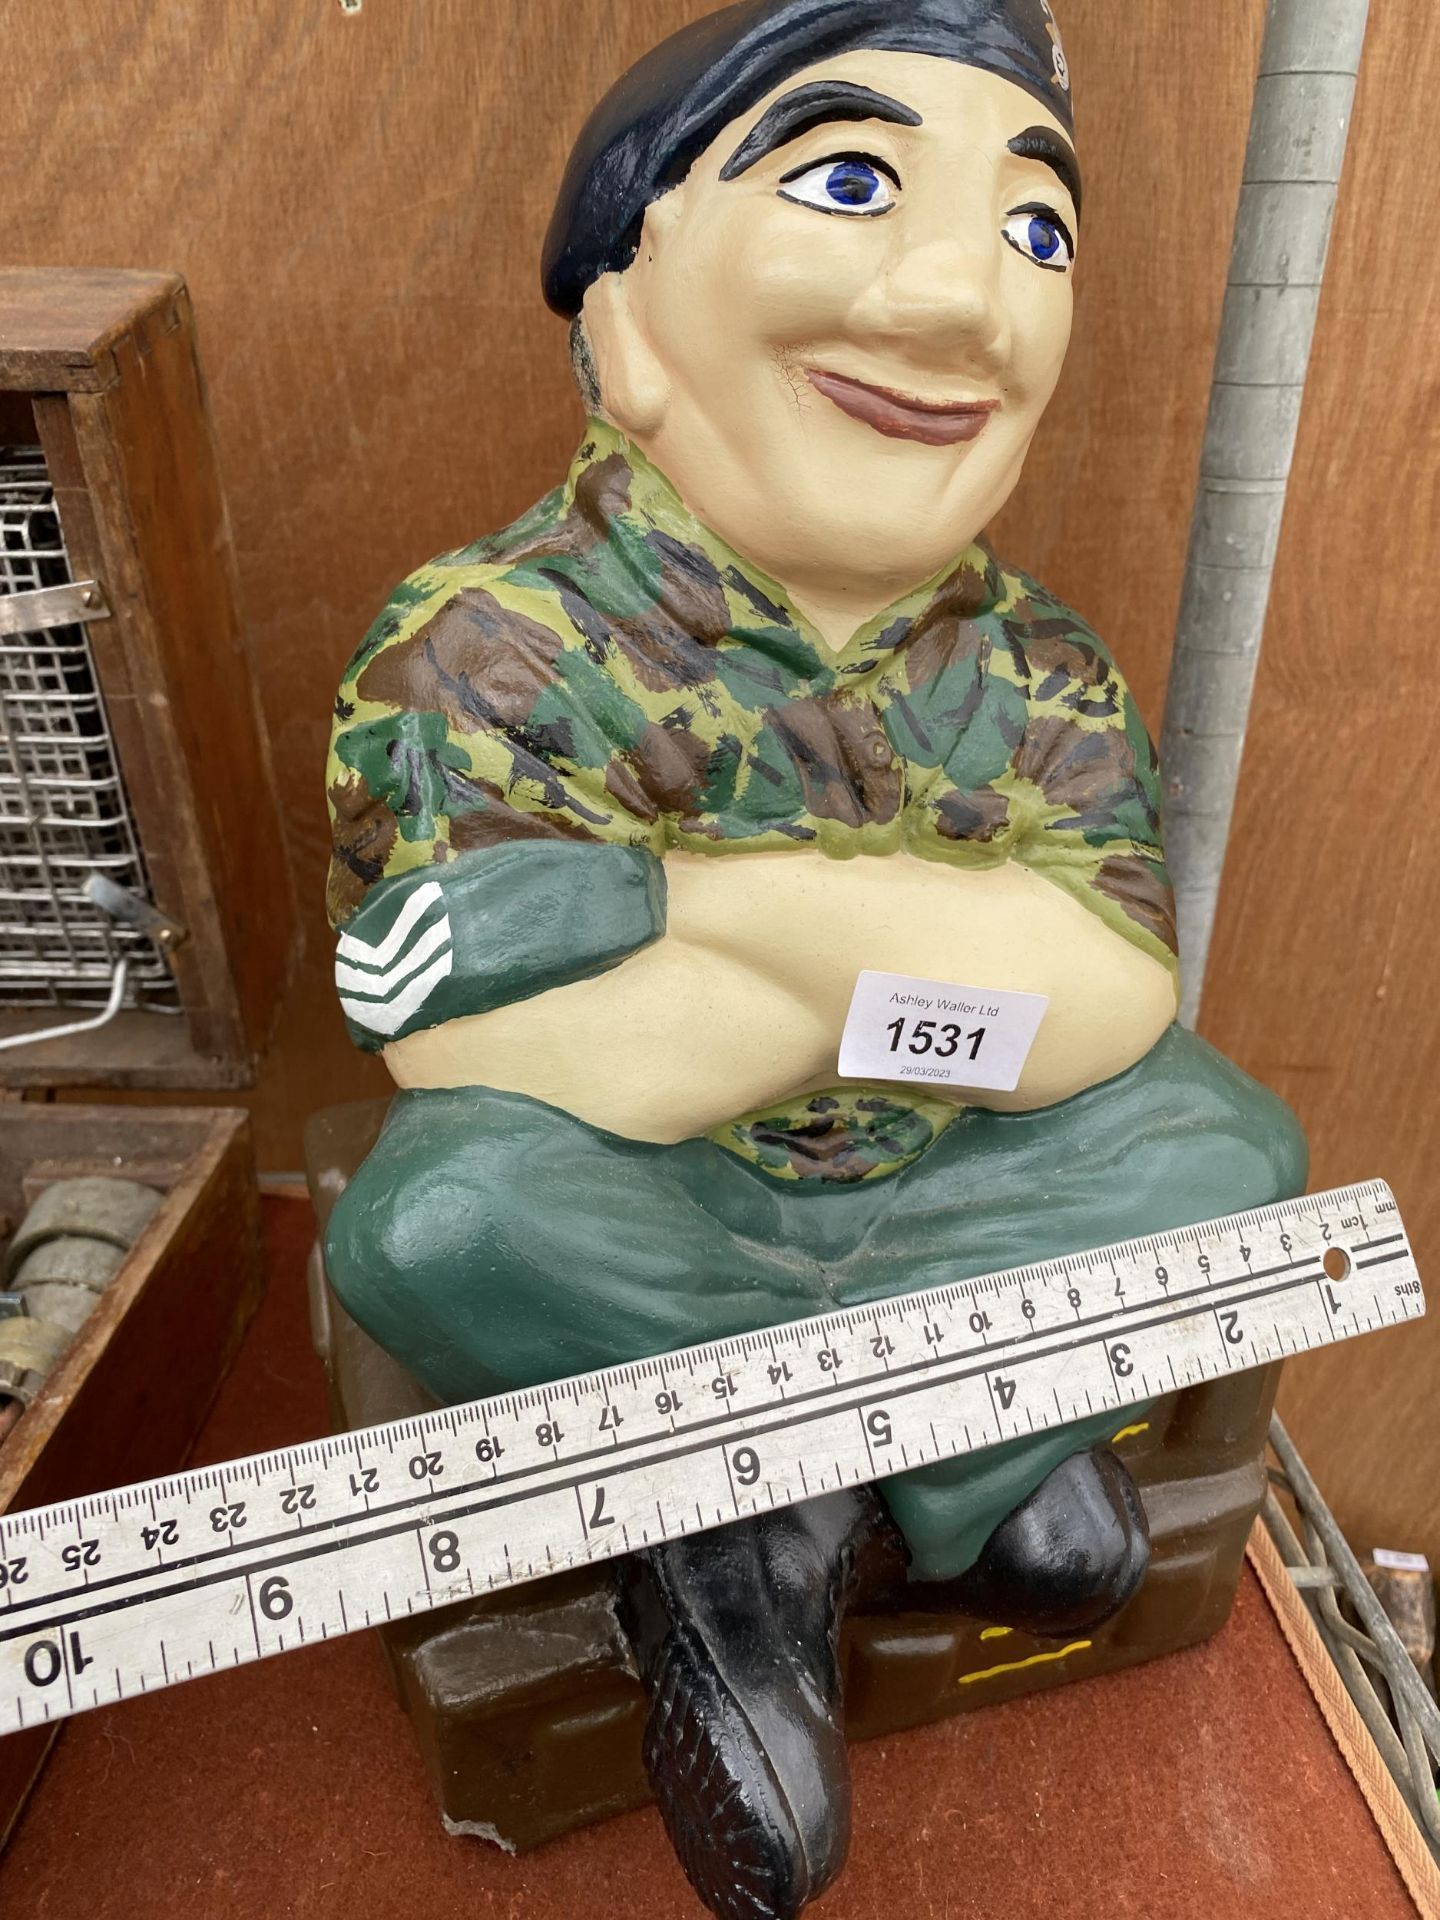 A LARGE HEAVY PAINTED FIGURE OF A MILITARY OFFICER - Image 2 of 4